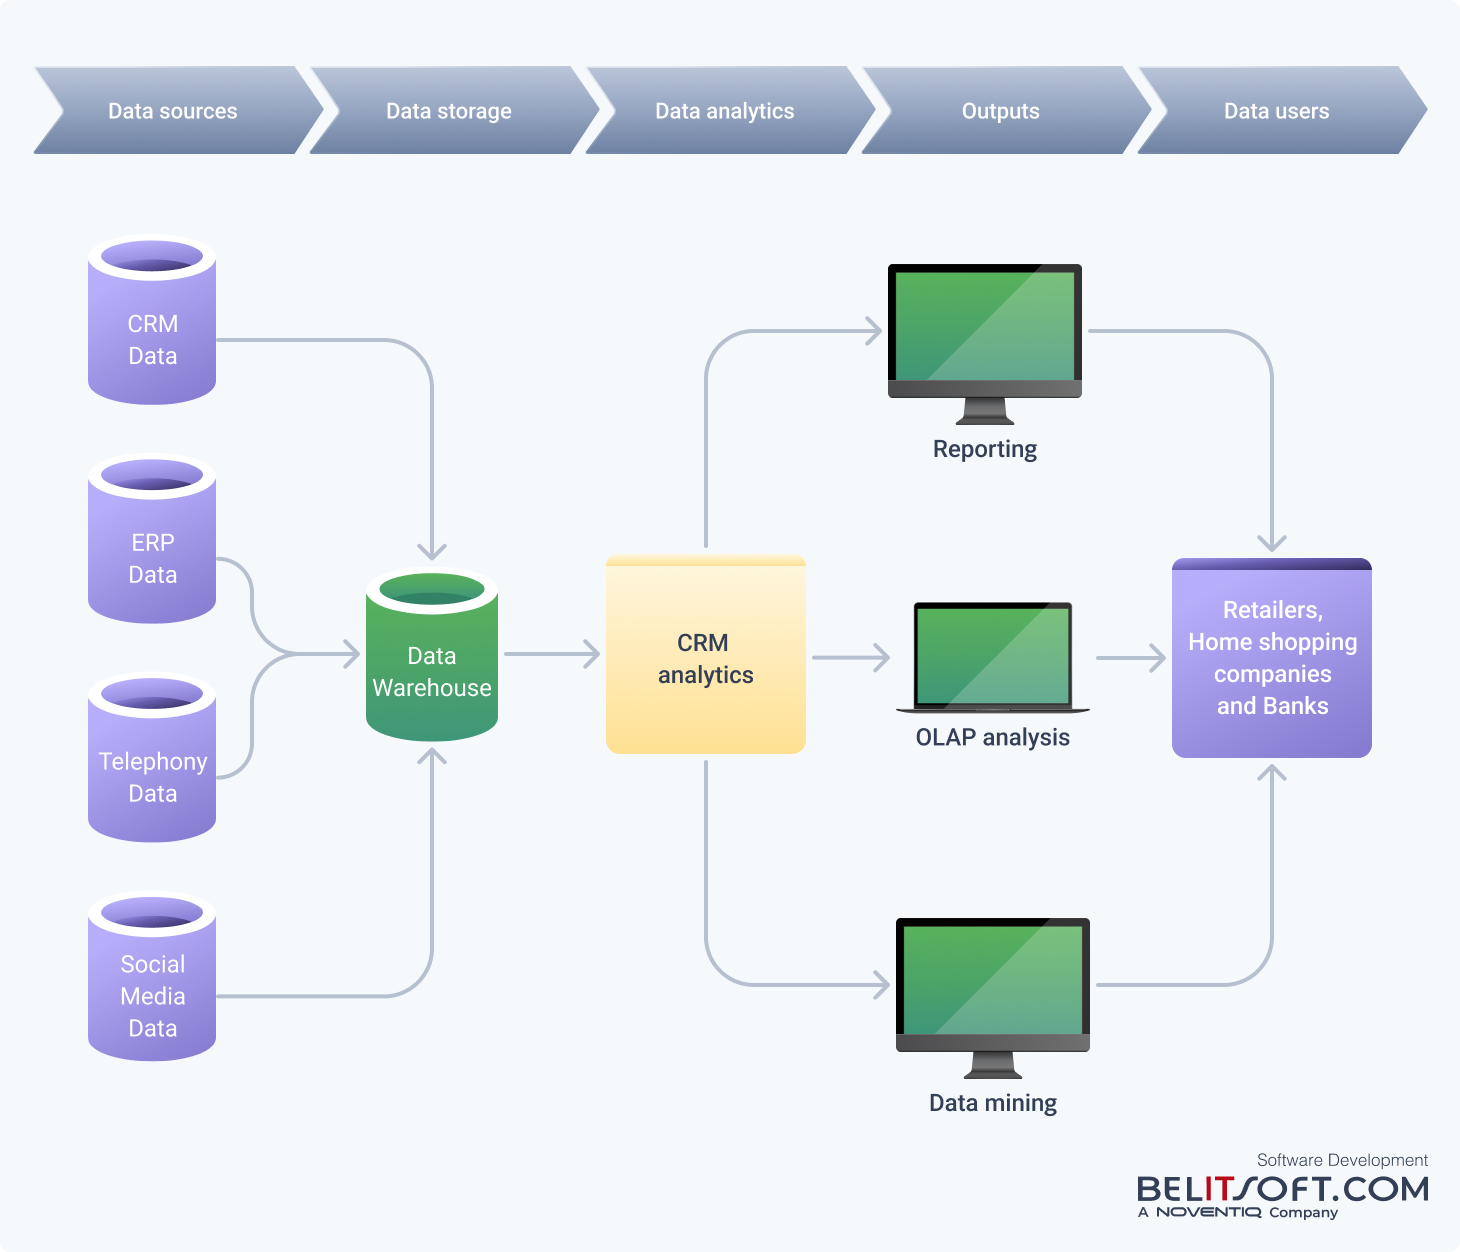 Typical CRM architecture with web, back-office integration, and mobile